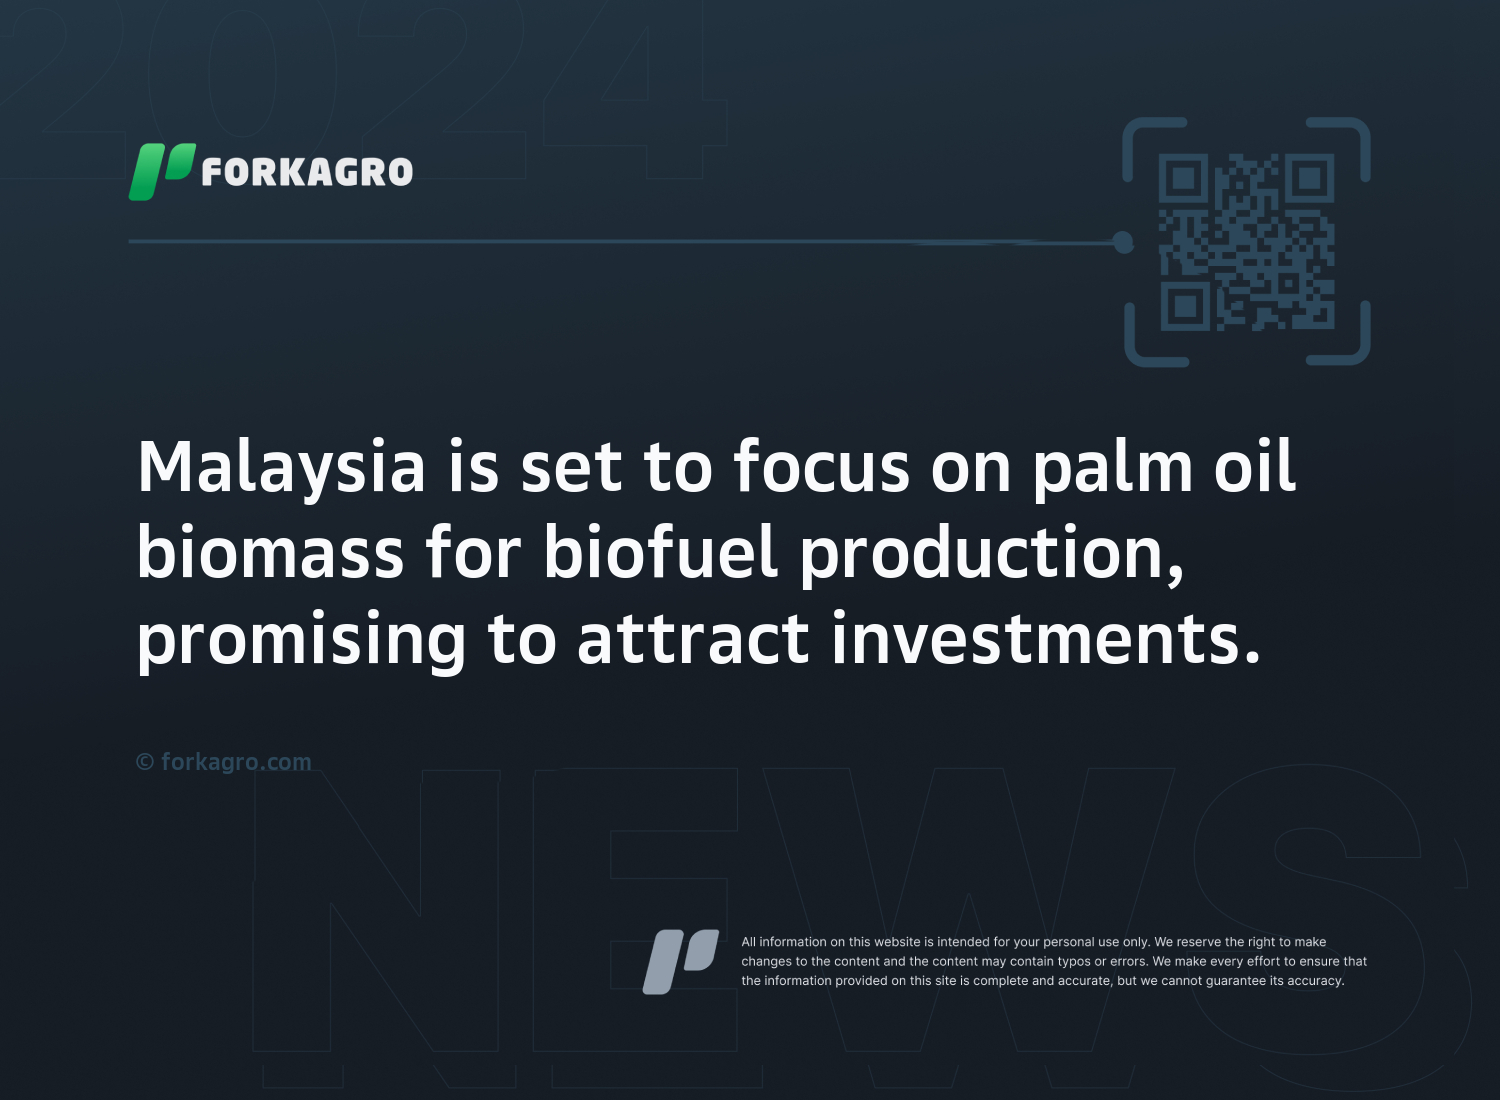 Malaysia is set to focus on palm oil biomass for biofuel production, promising to attract investments.